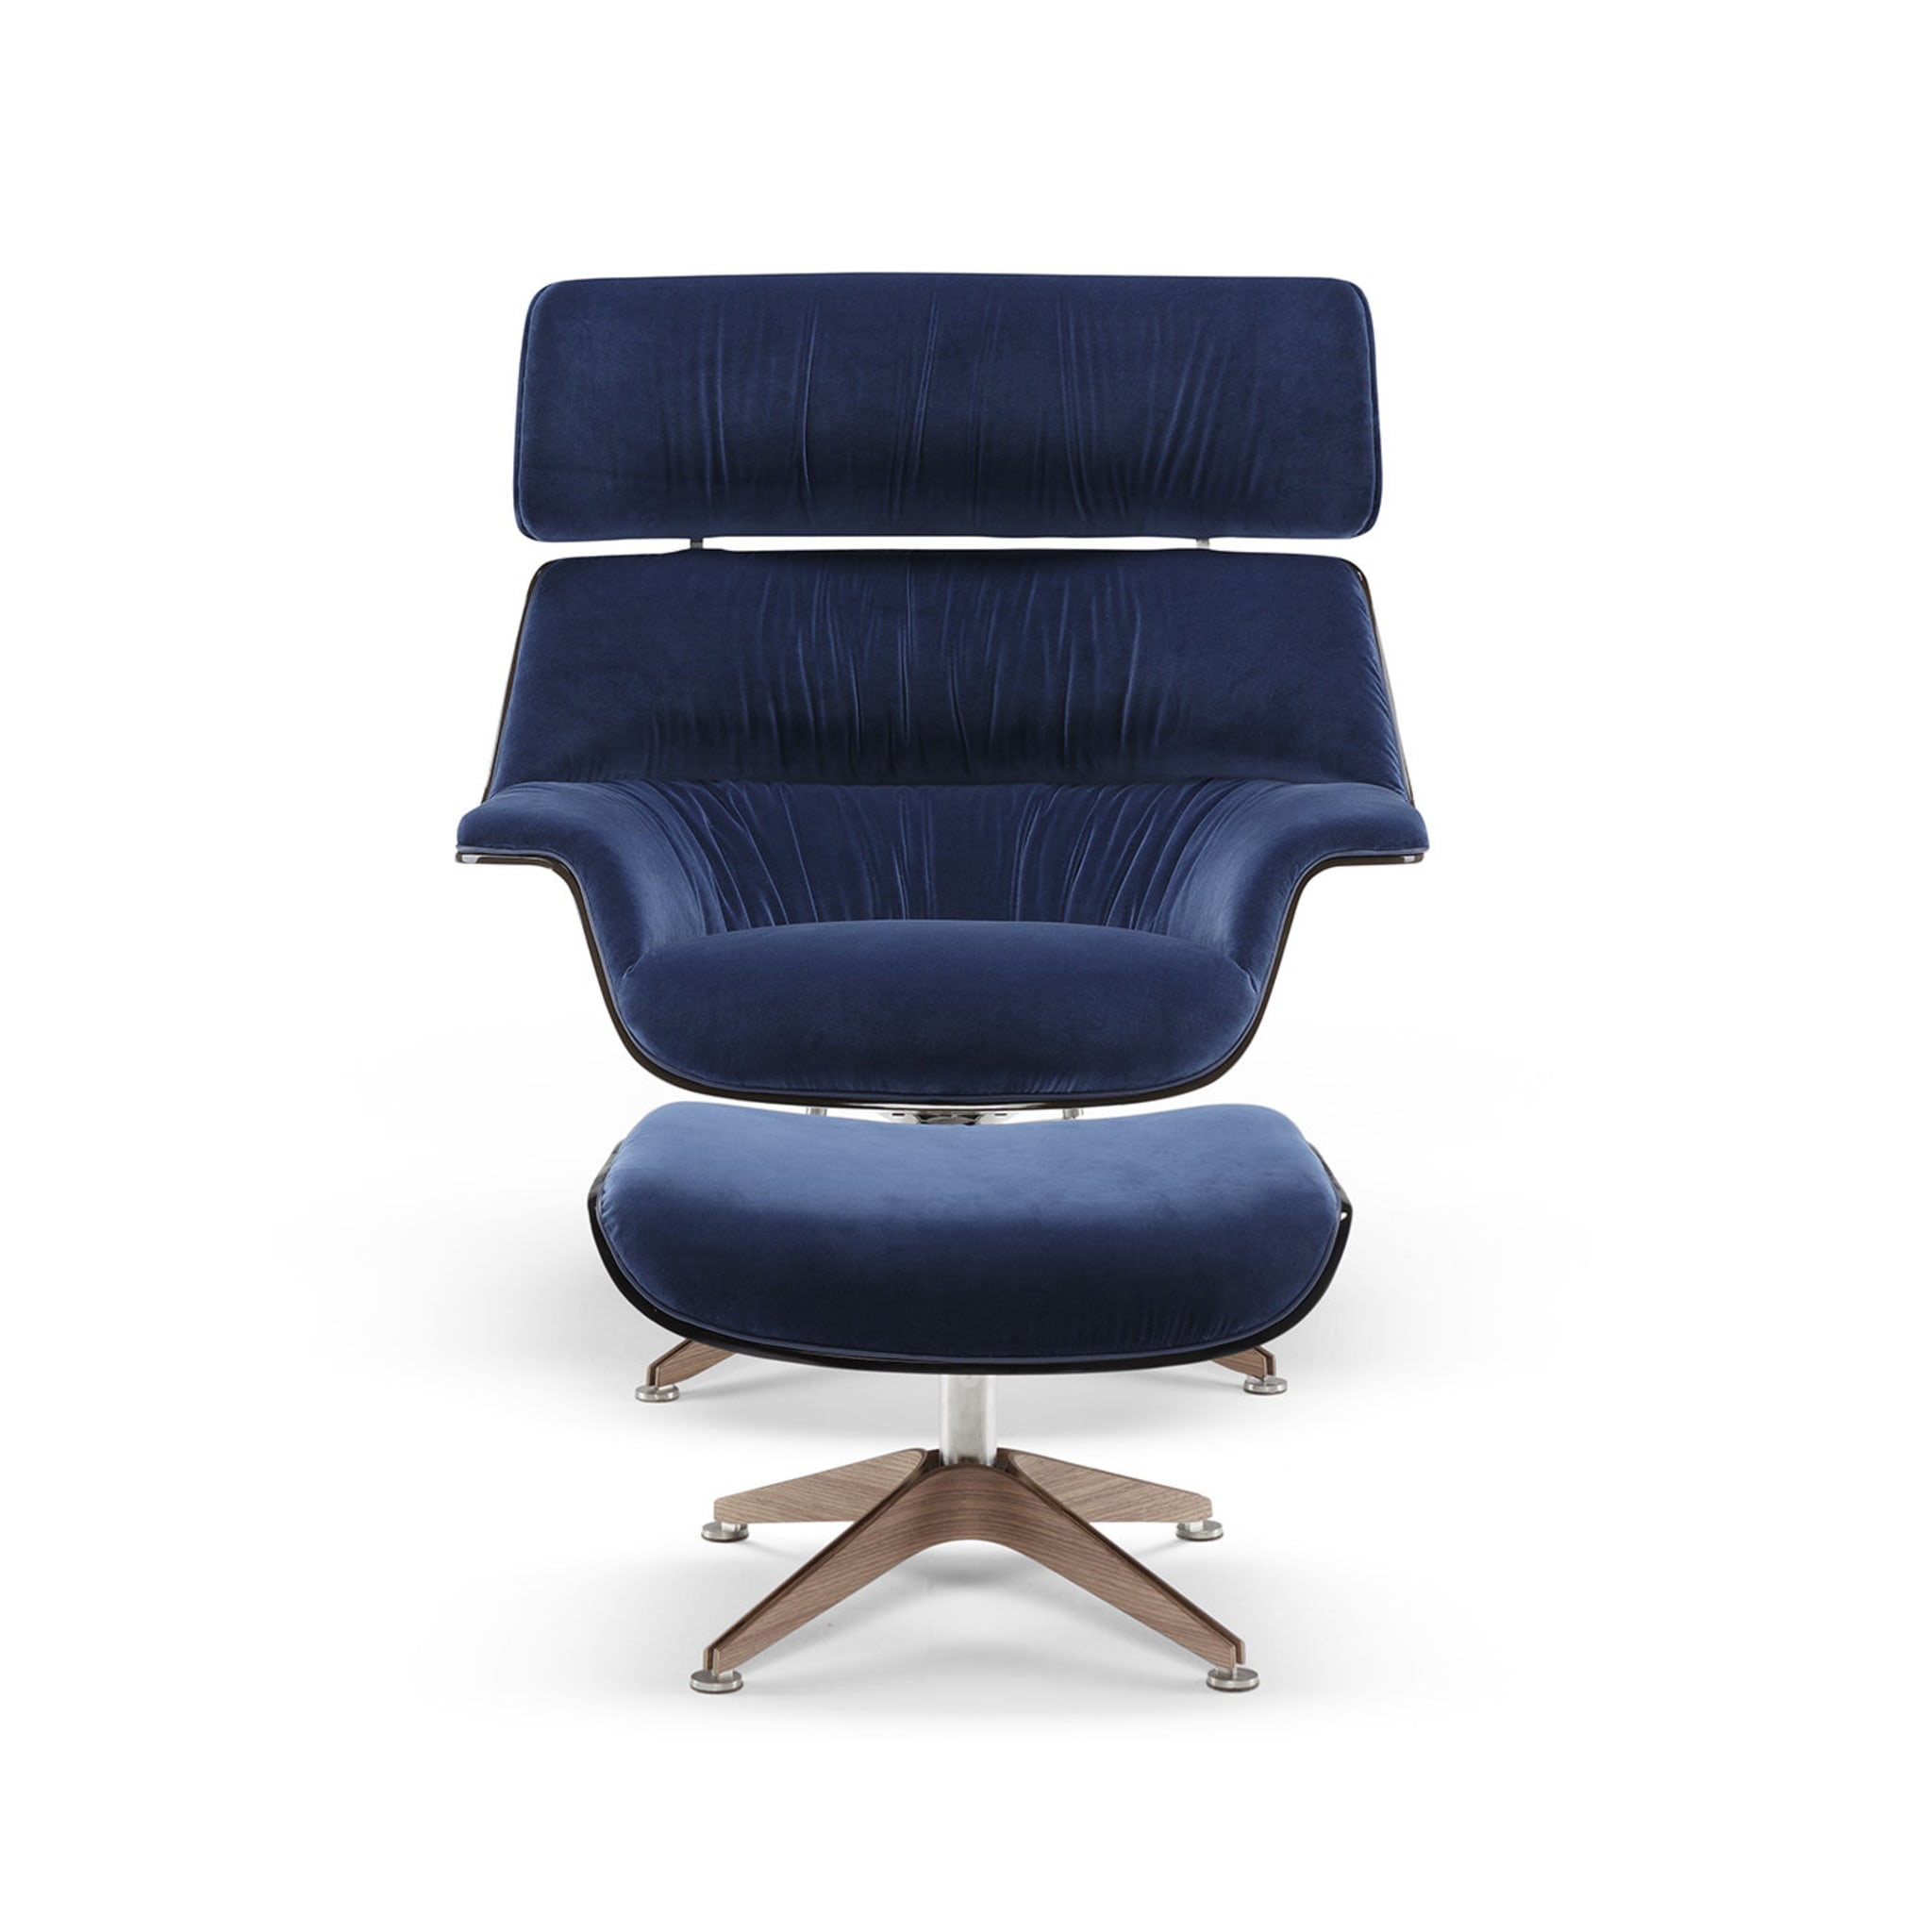 Coach Lounge Chair and Footrest by Jean Marie Massaud - Alternative view 2